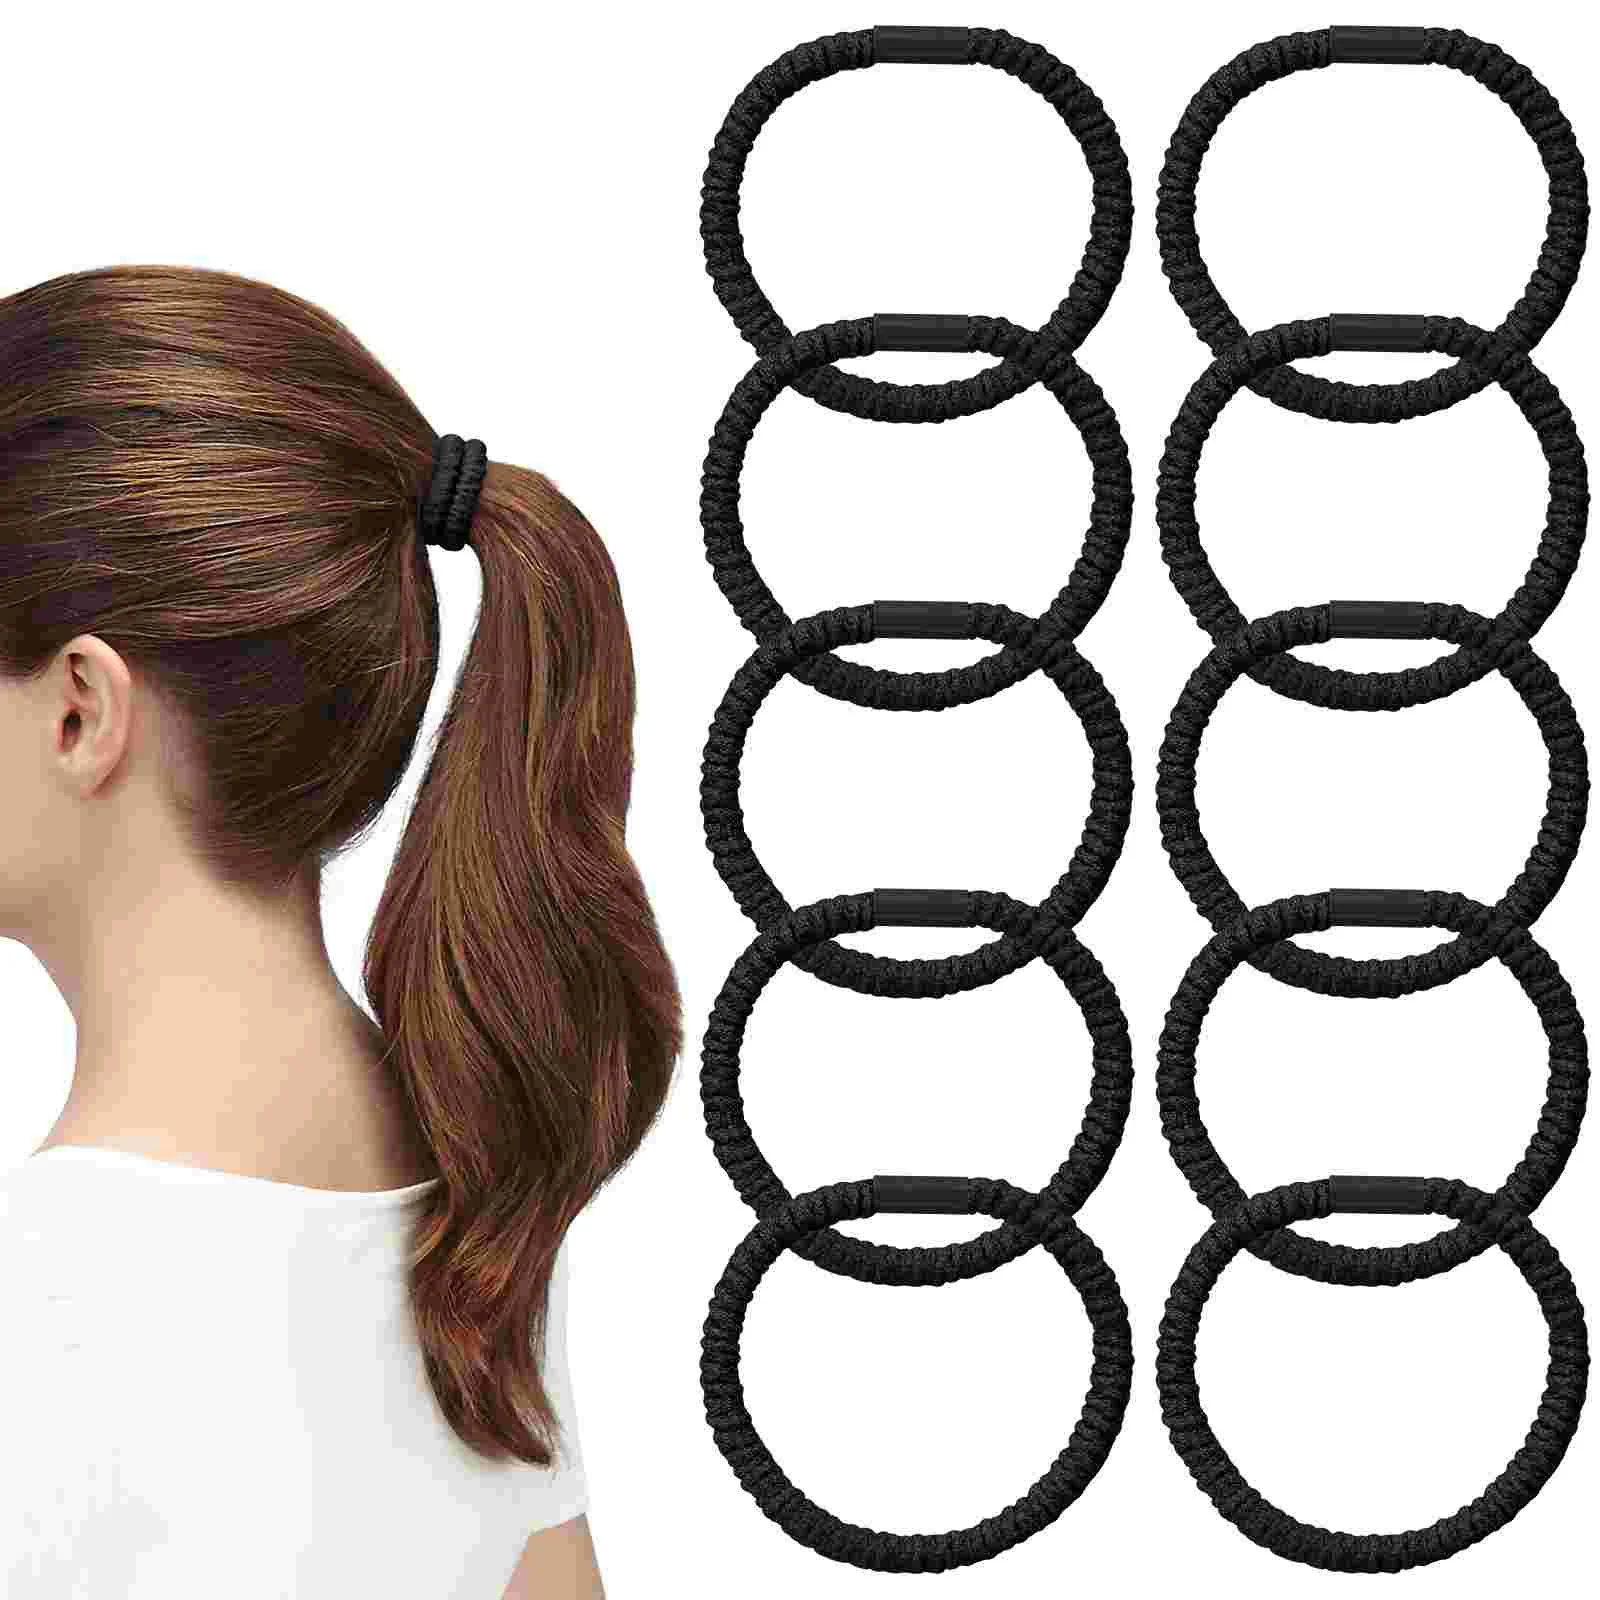 

10 Pcs Hair Band Set Ties For Thick Bands Ribbons Stretchy Scrunchies Girls No Damage Elastic Women